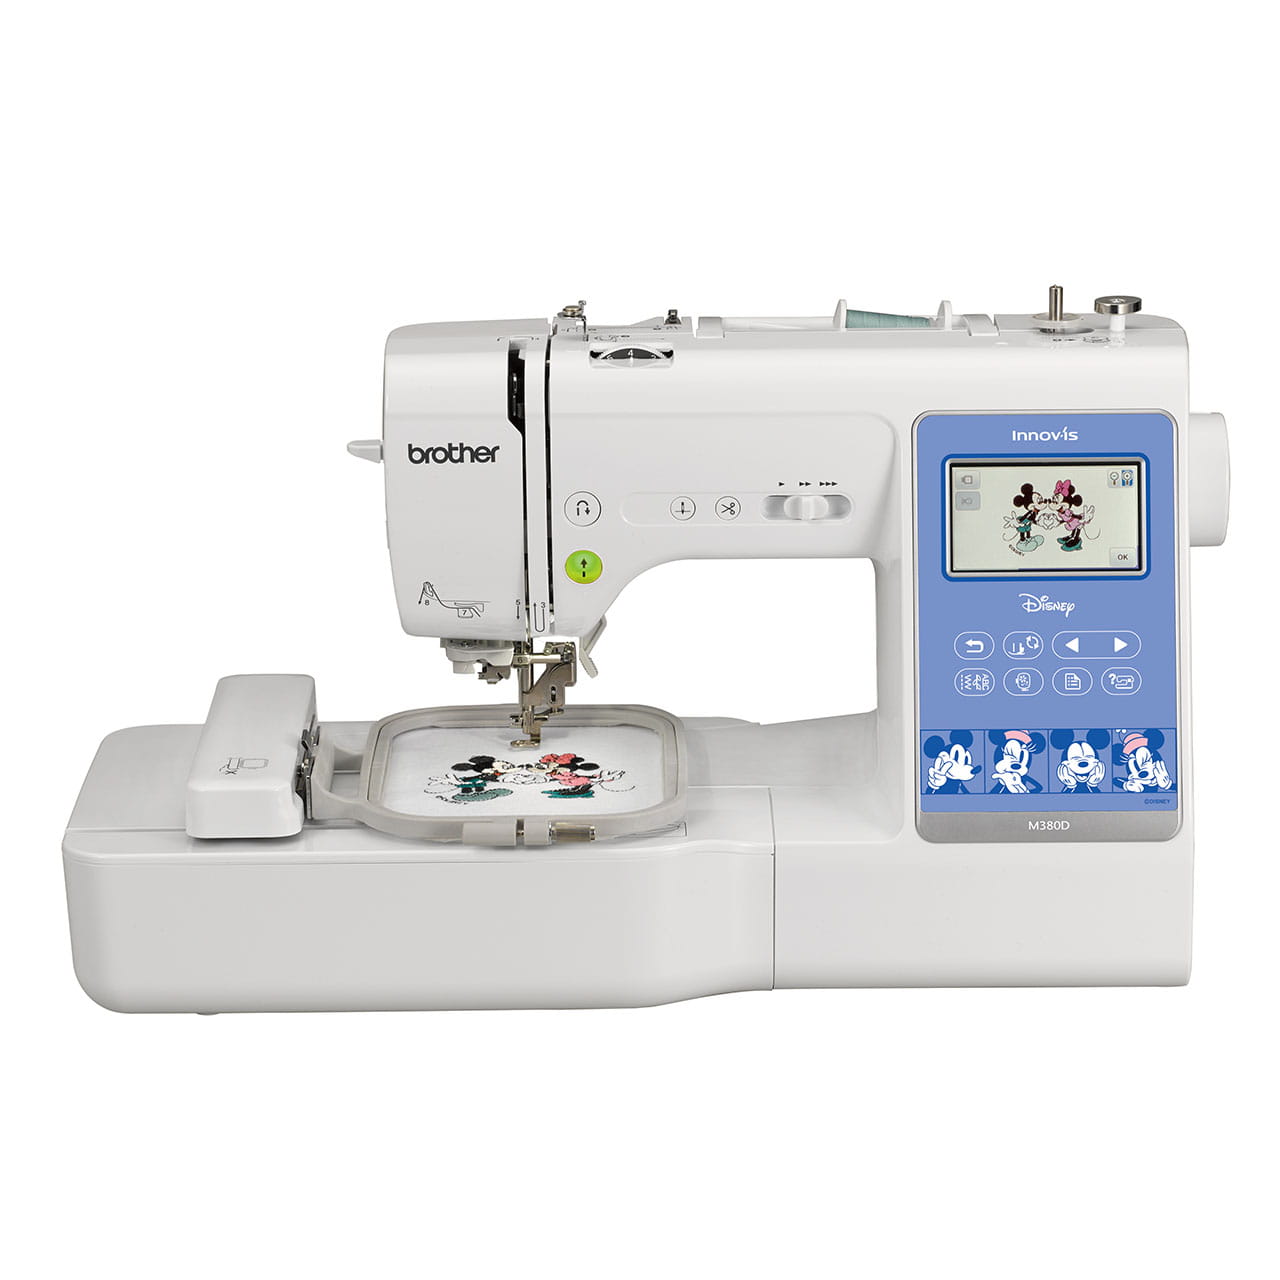 Brother Innov-is M380D Sewing, Embroidery & Quilting Machine Front View1